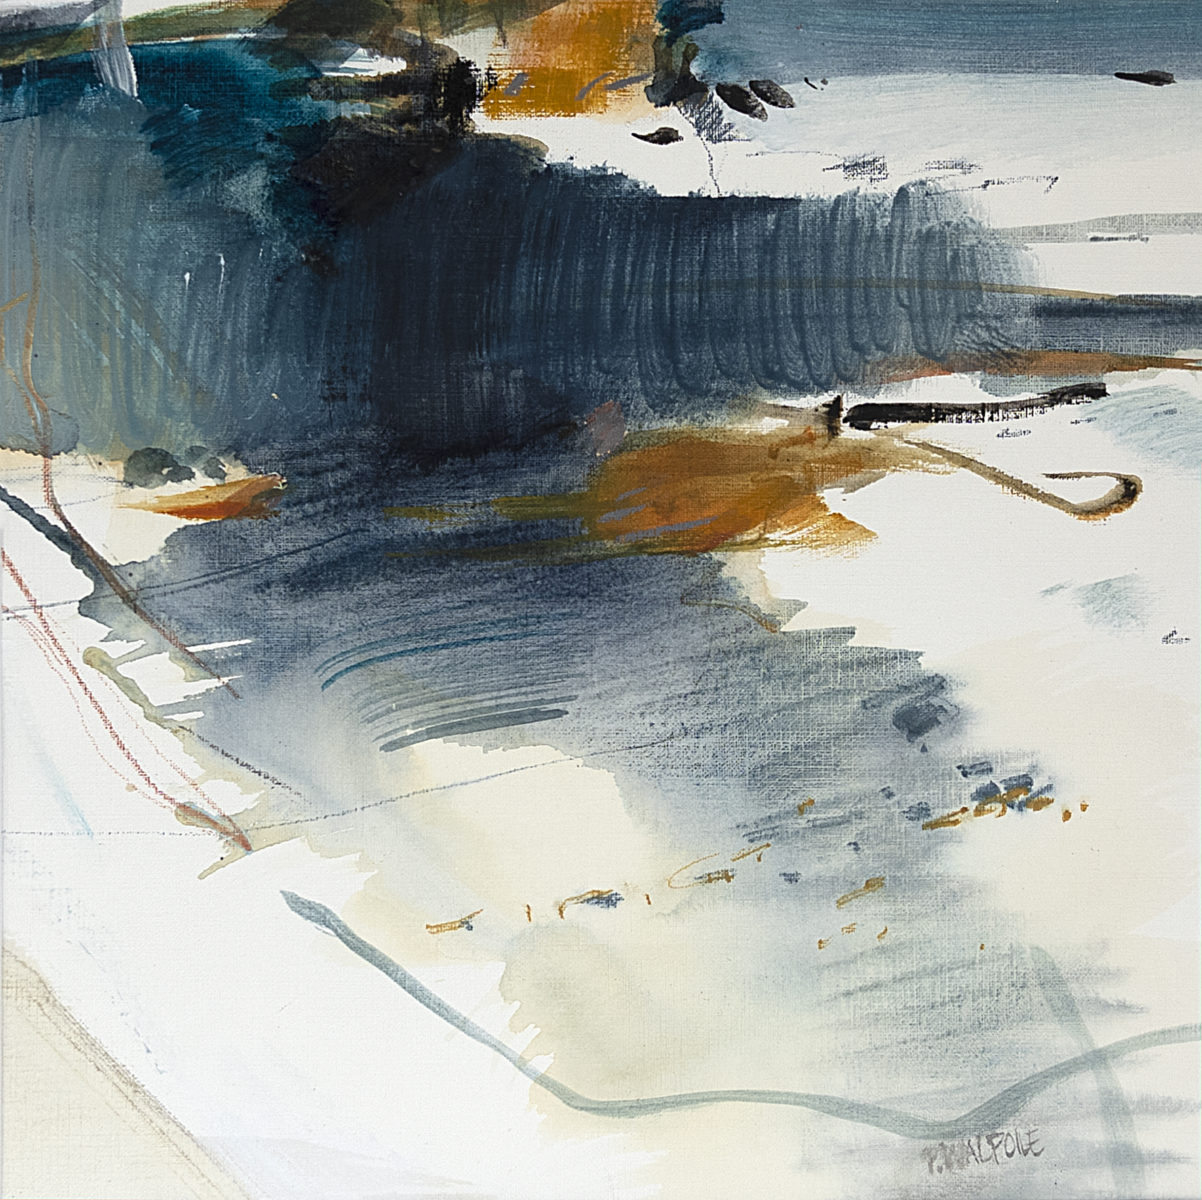 Seaview creek | Pam Walpole | Mixed media on paper | 60 x 60 cm, framed in white | $1100